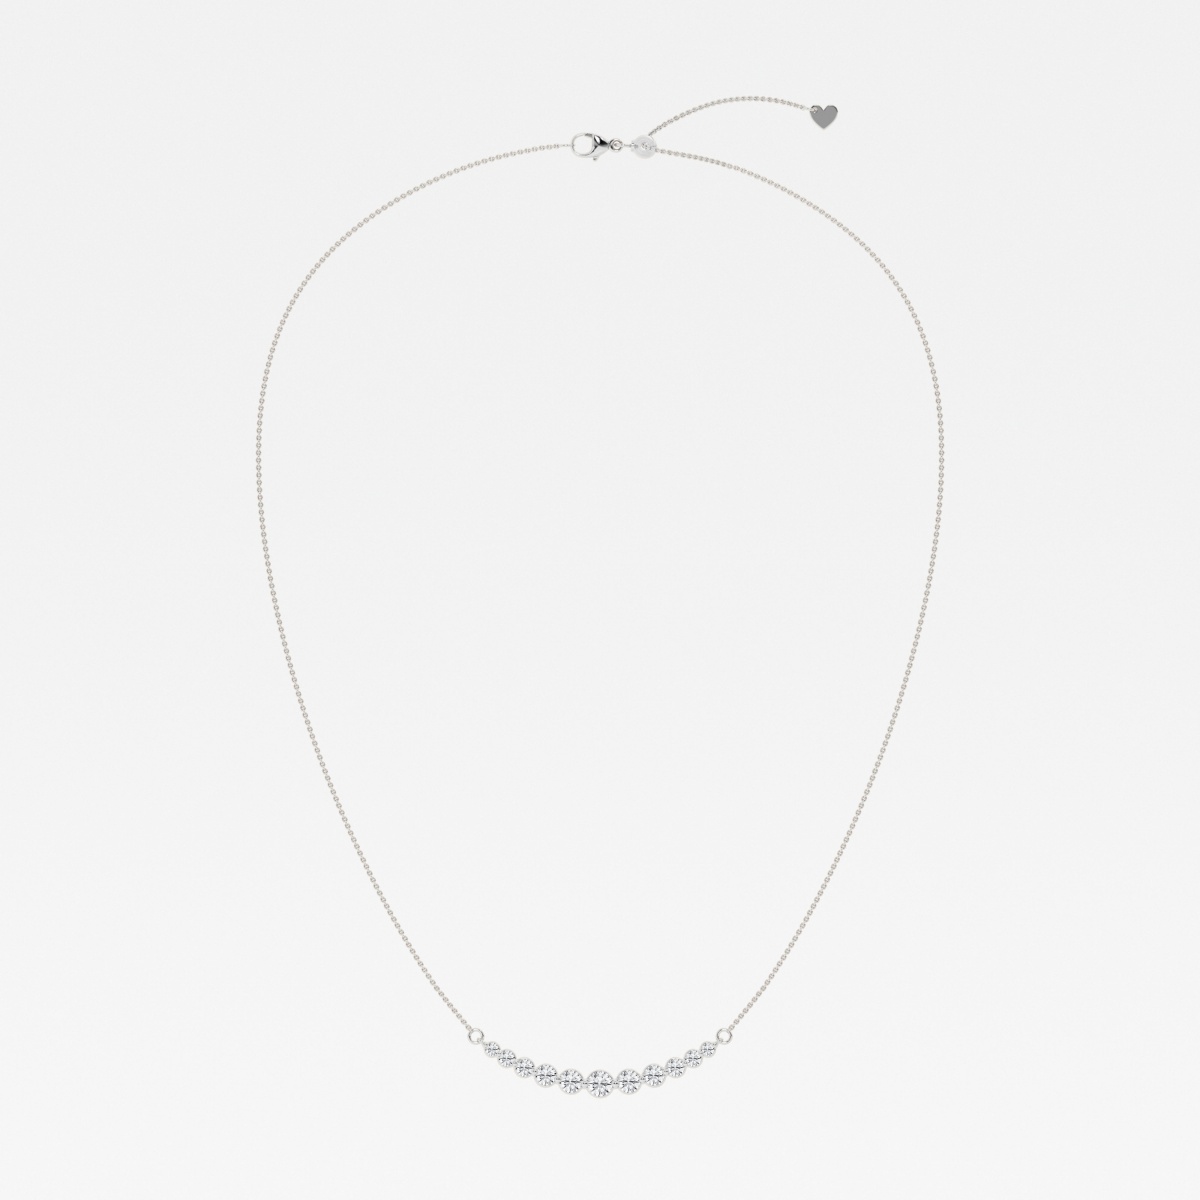 Additional Image 1 for  1 ctw Round Lab Grown Diamond Curved Center Fashion Necklace